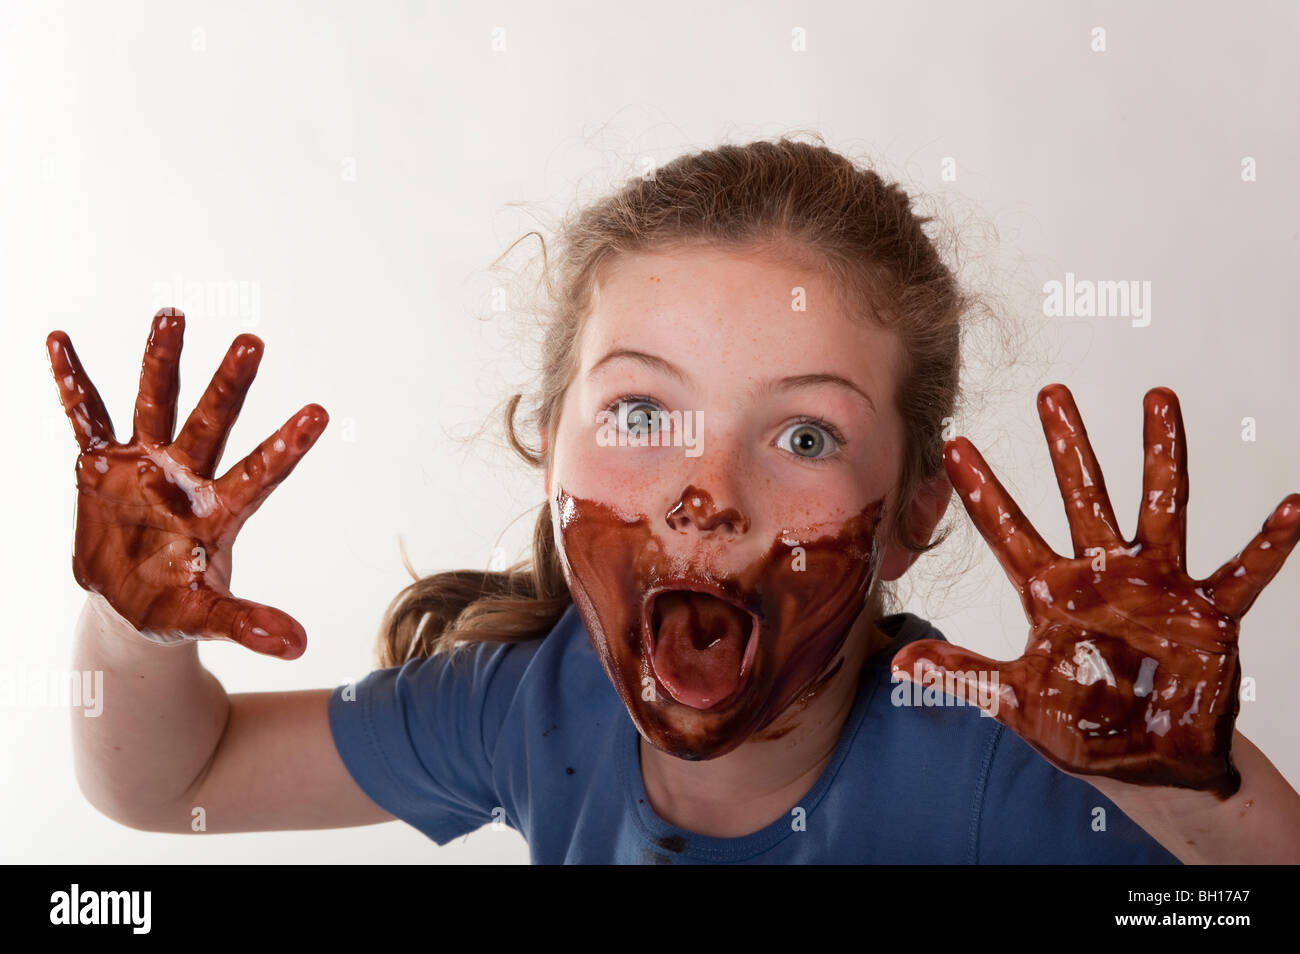 little girl smiling through chocolate covered face Stock Photo